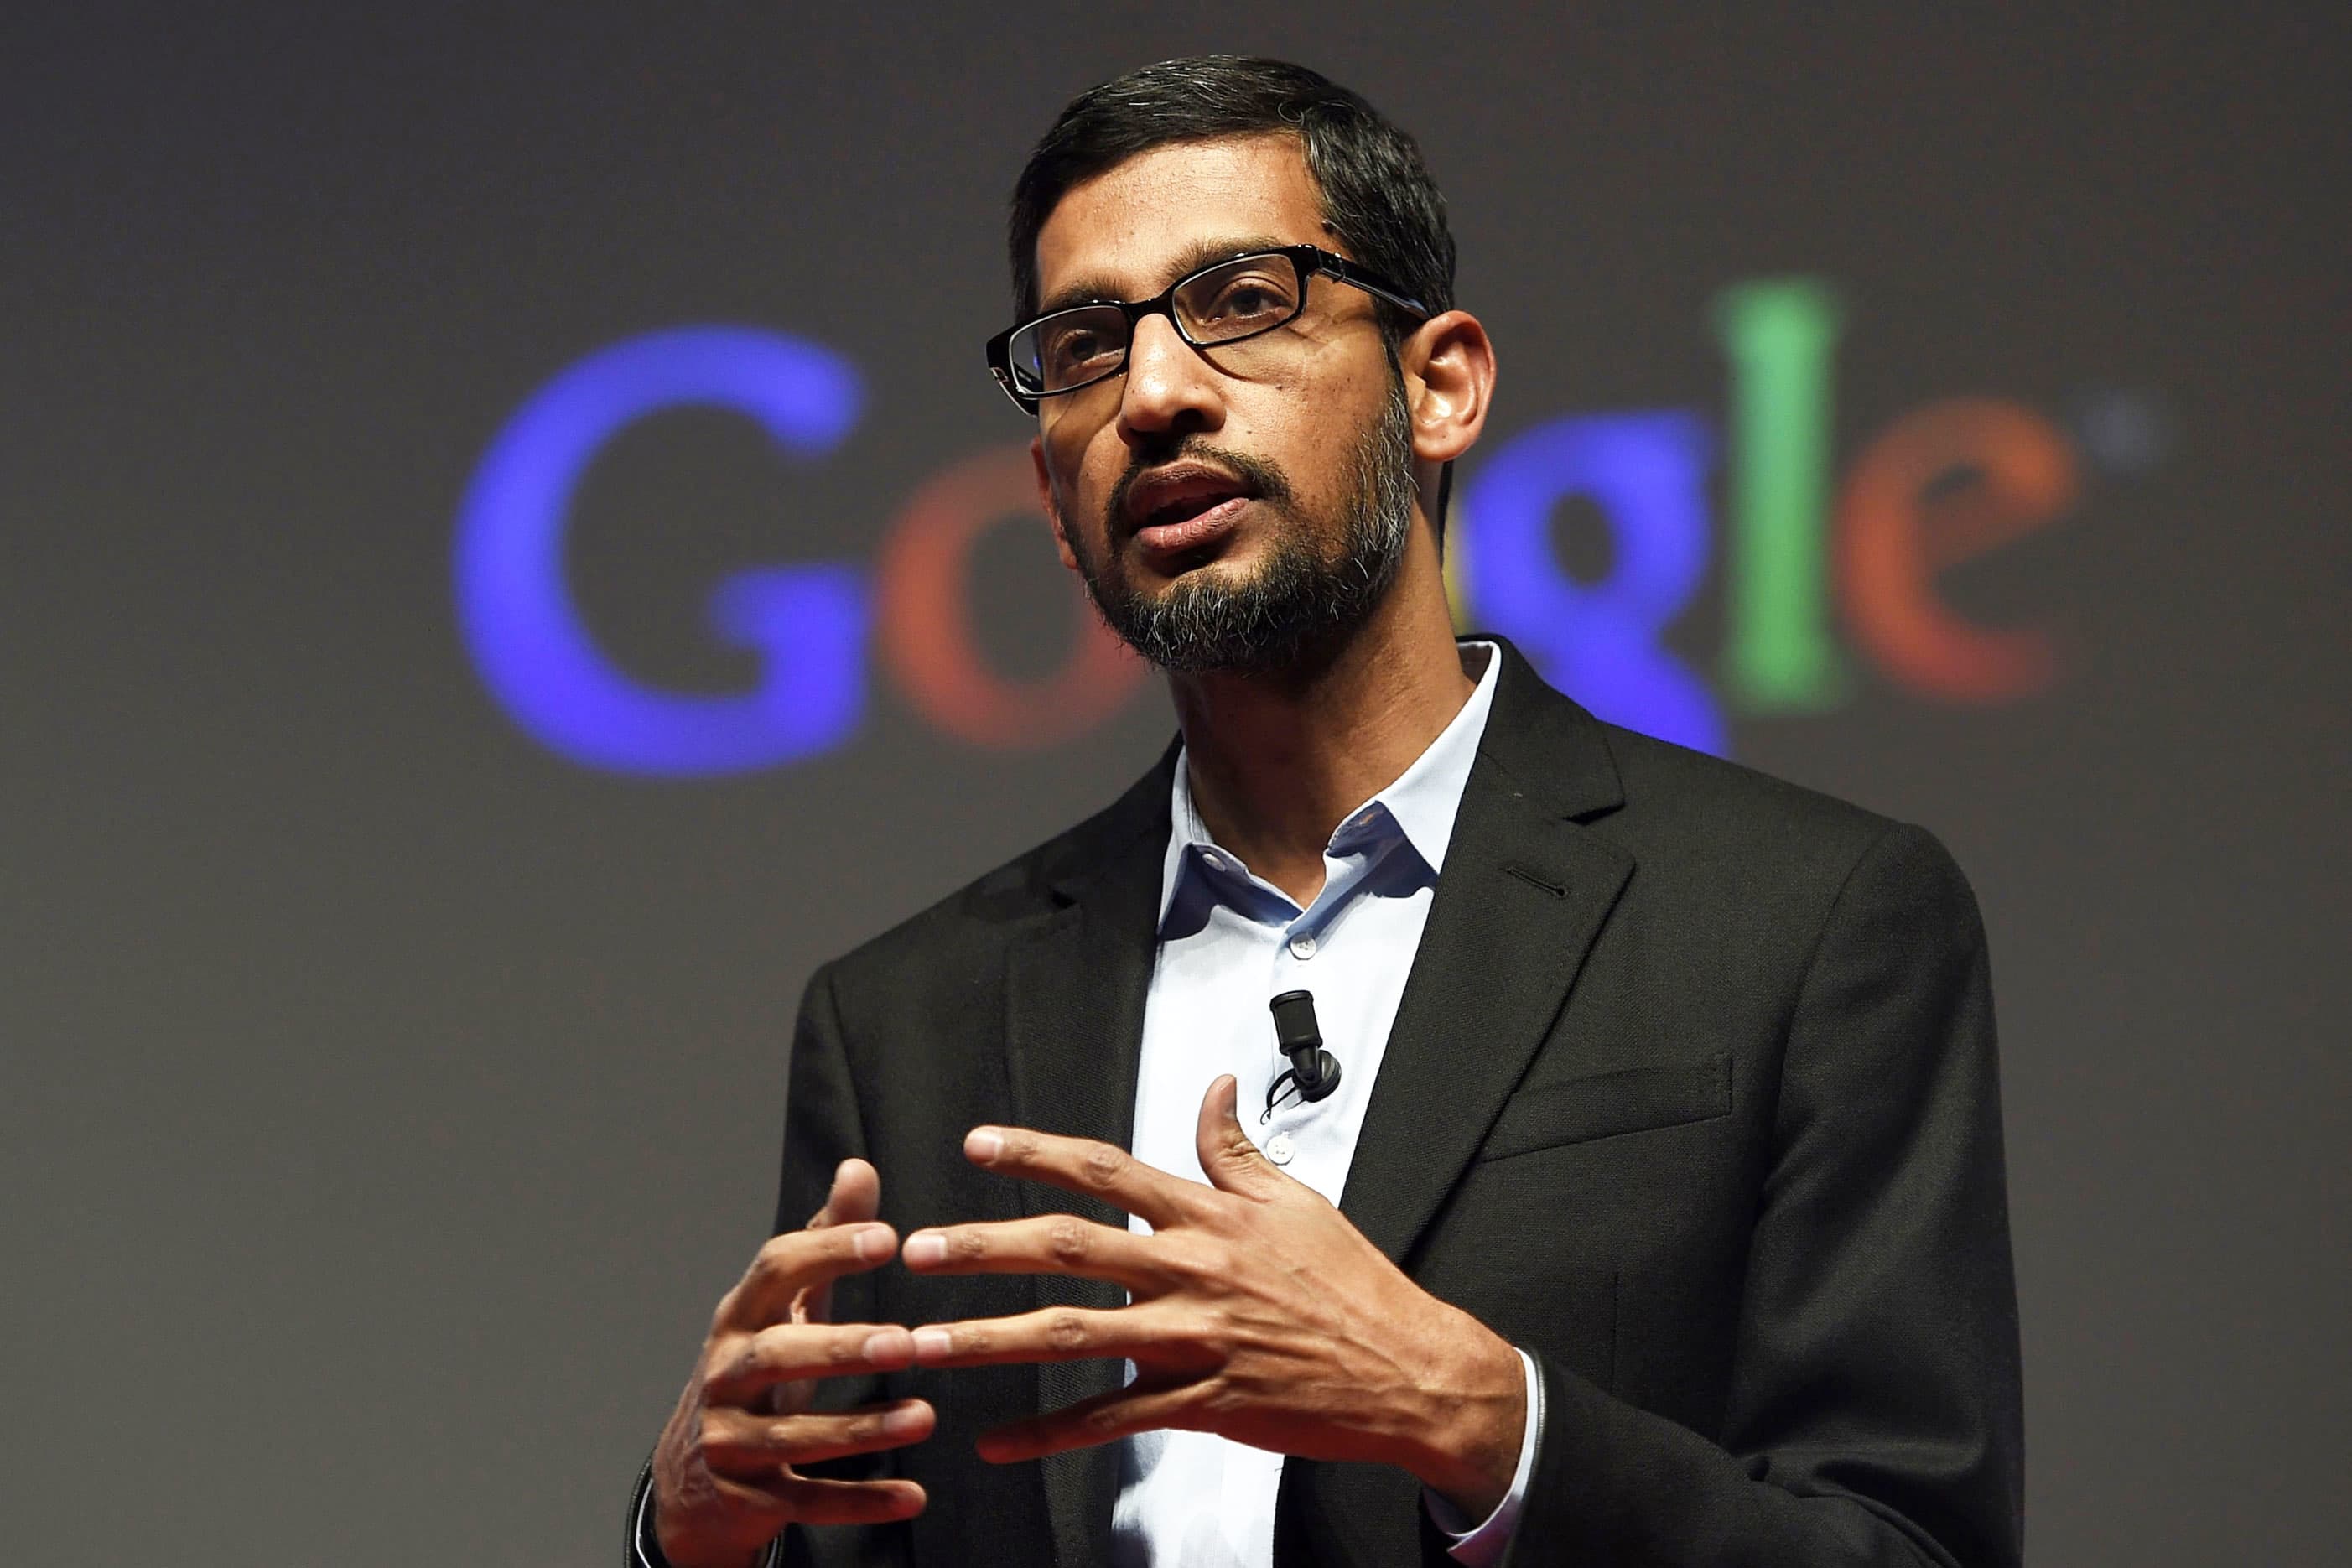 Google to acquire cybersecurity firm Mandiant for $5.4 billion